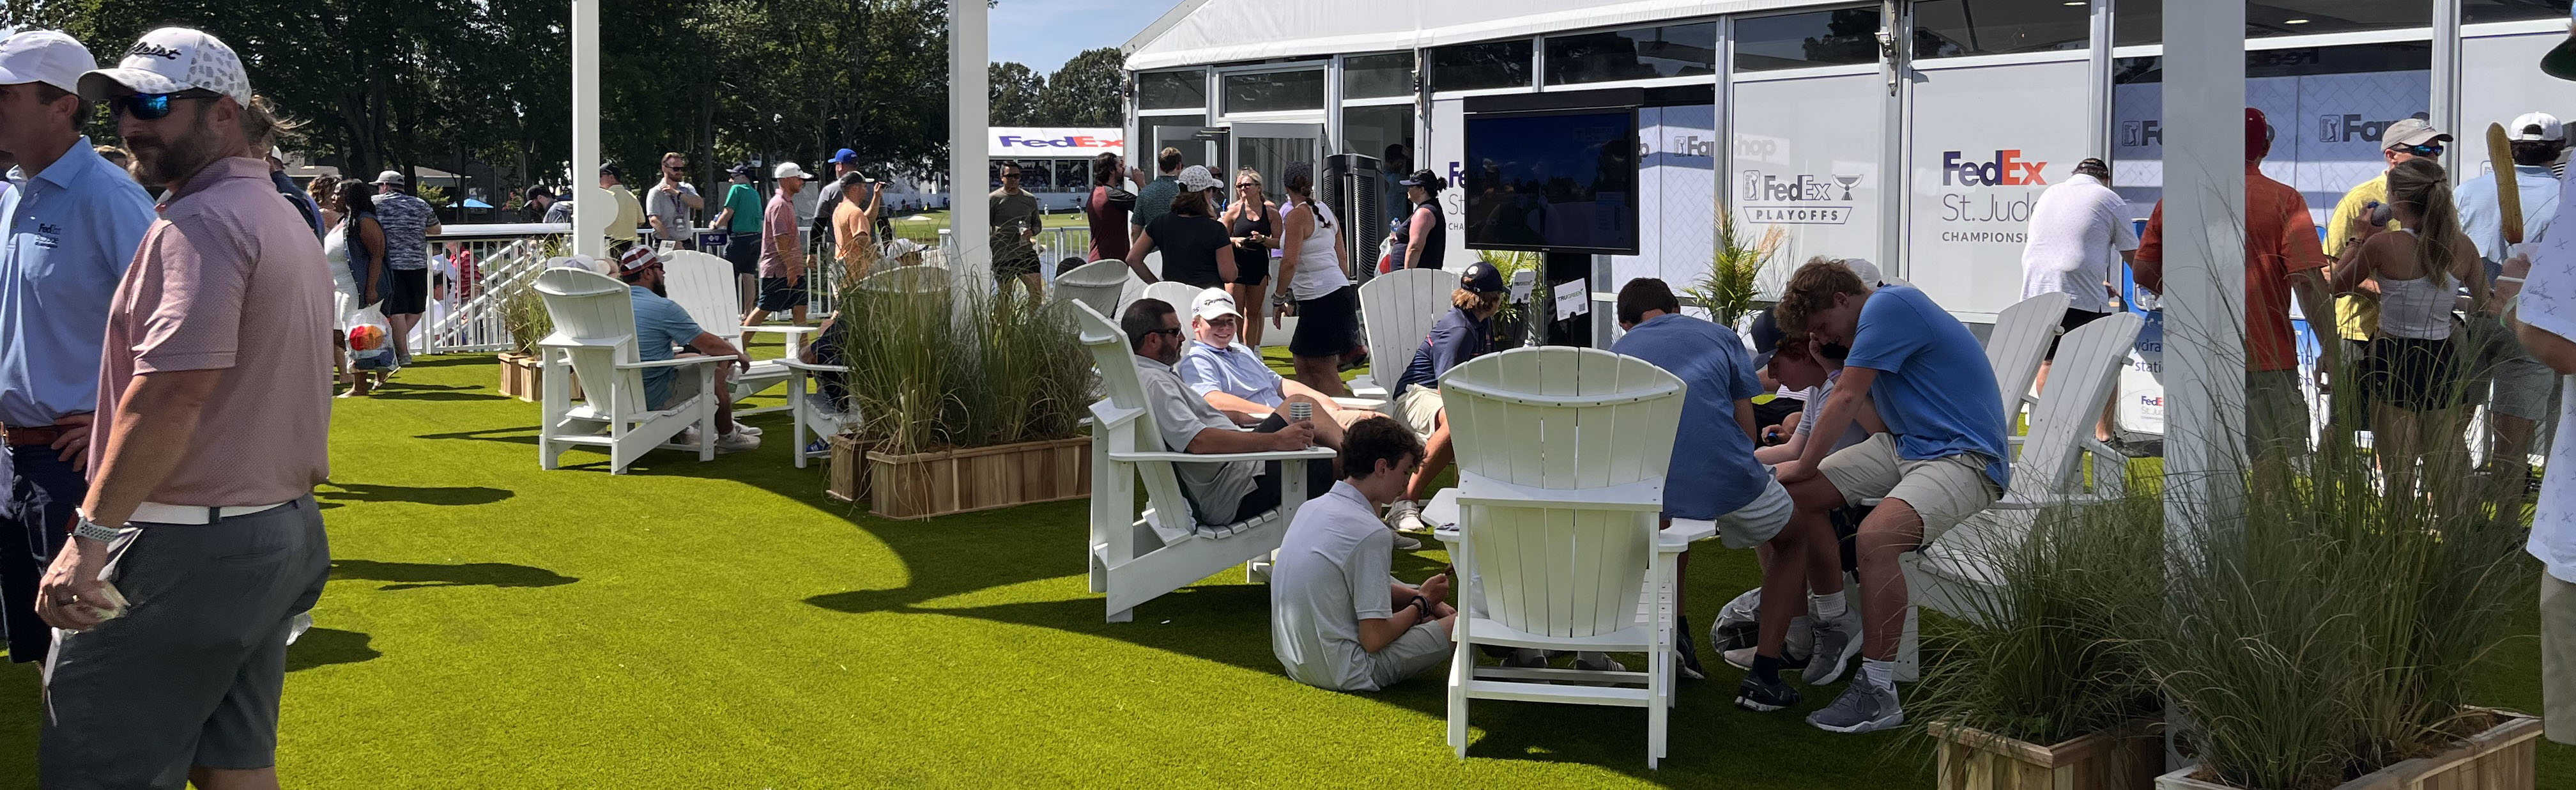 TruGreen Hosts Exclusive Experiences at the PGA TOUR’S FedEx St. Jude Championship For The Second Consecutive Year Image